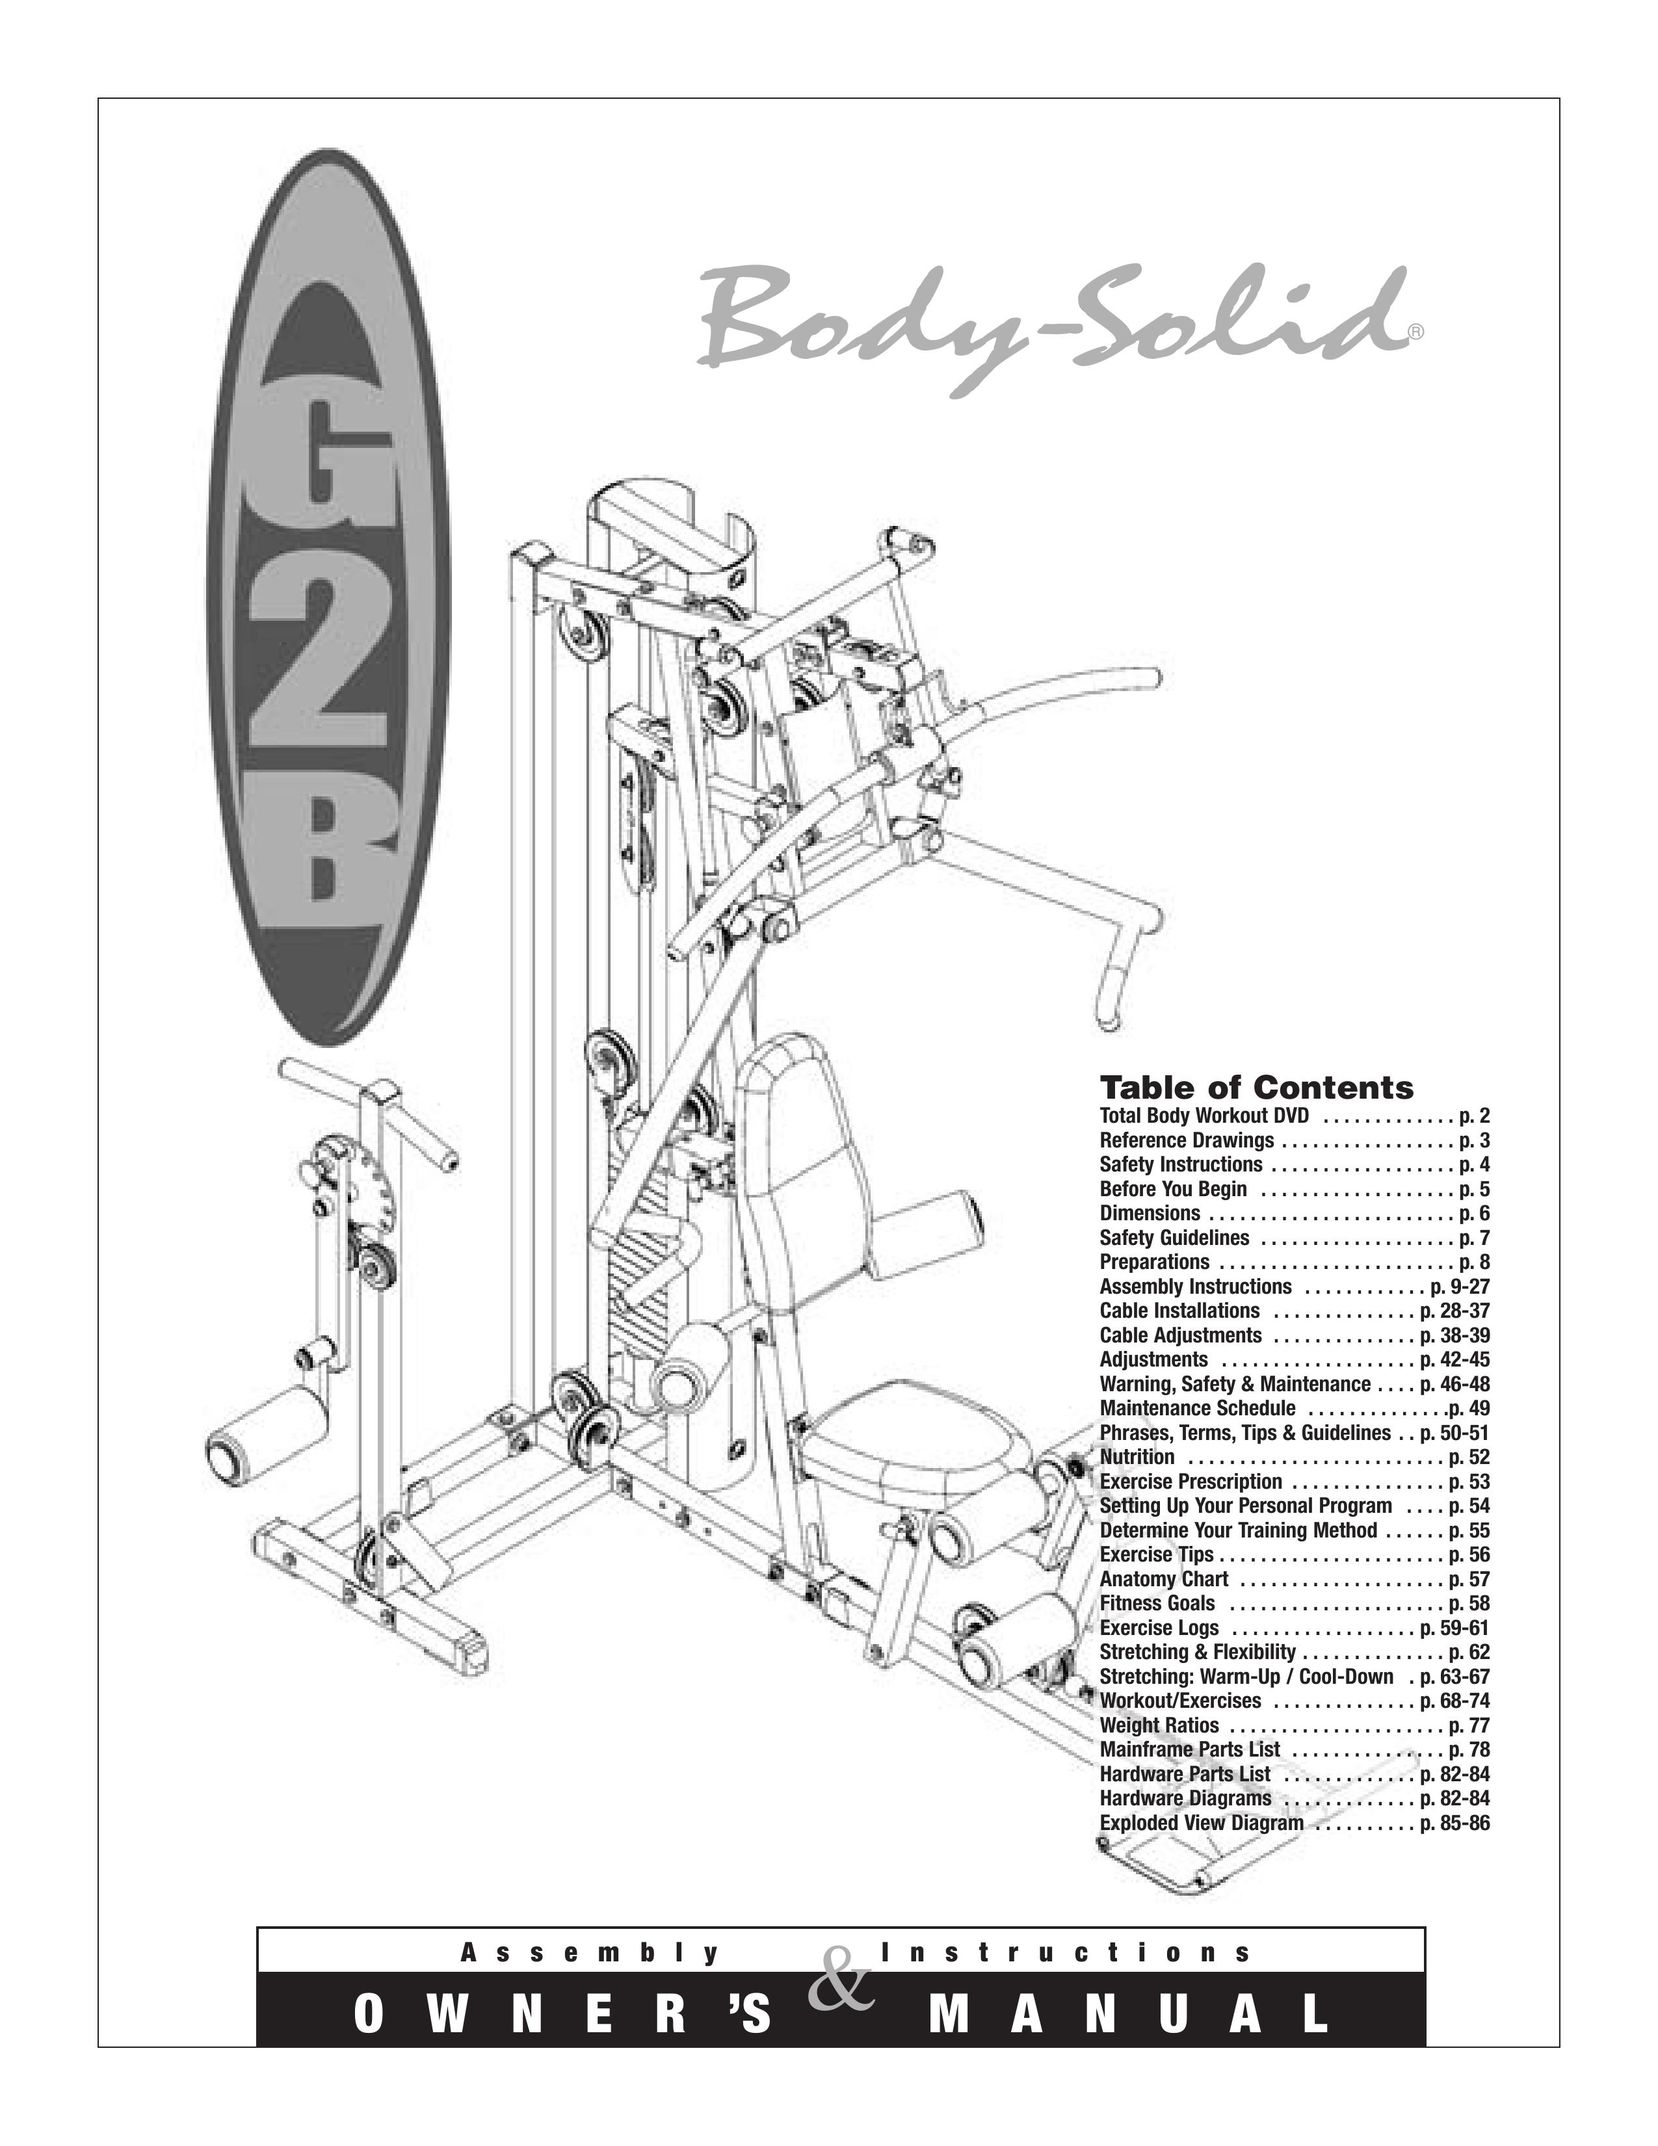 Body Solid G2B Fitness Equipment User Manual (Page 1)